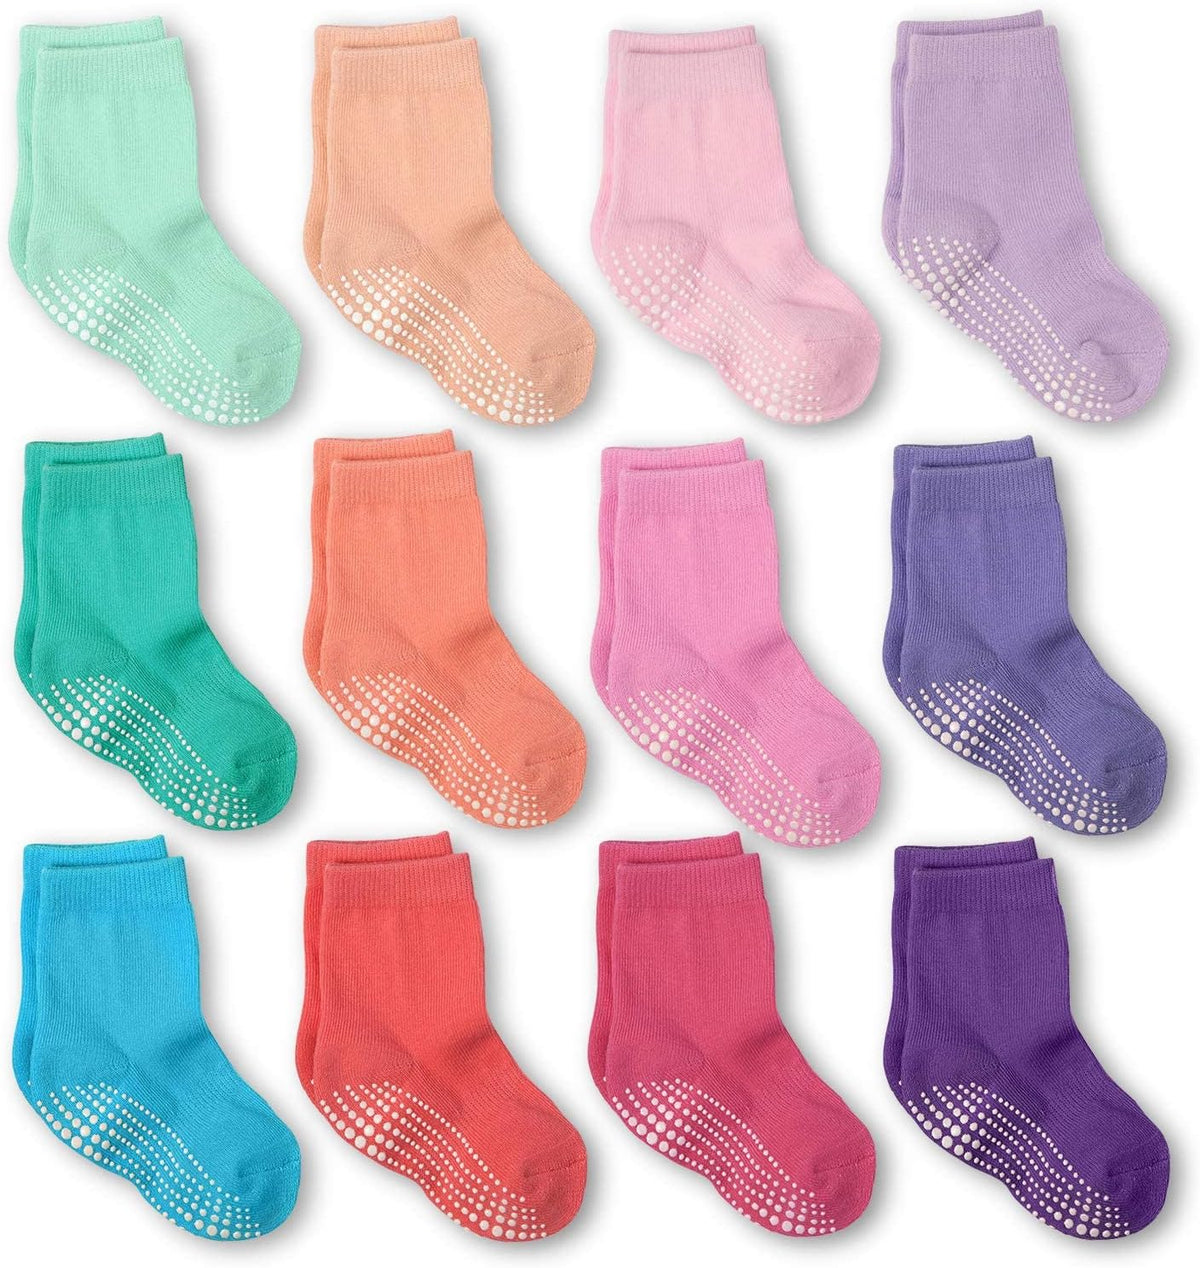 Non Slip Grip Ankle Boys and Girls Athletic Crew Socks for Babies Toddlers and Kids